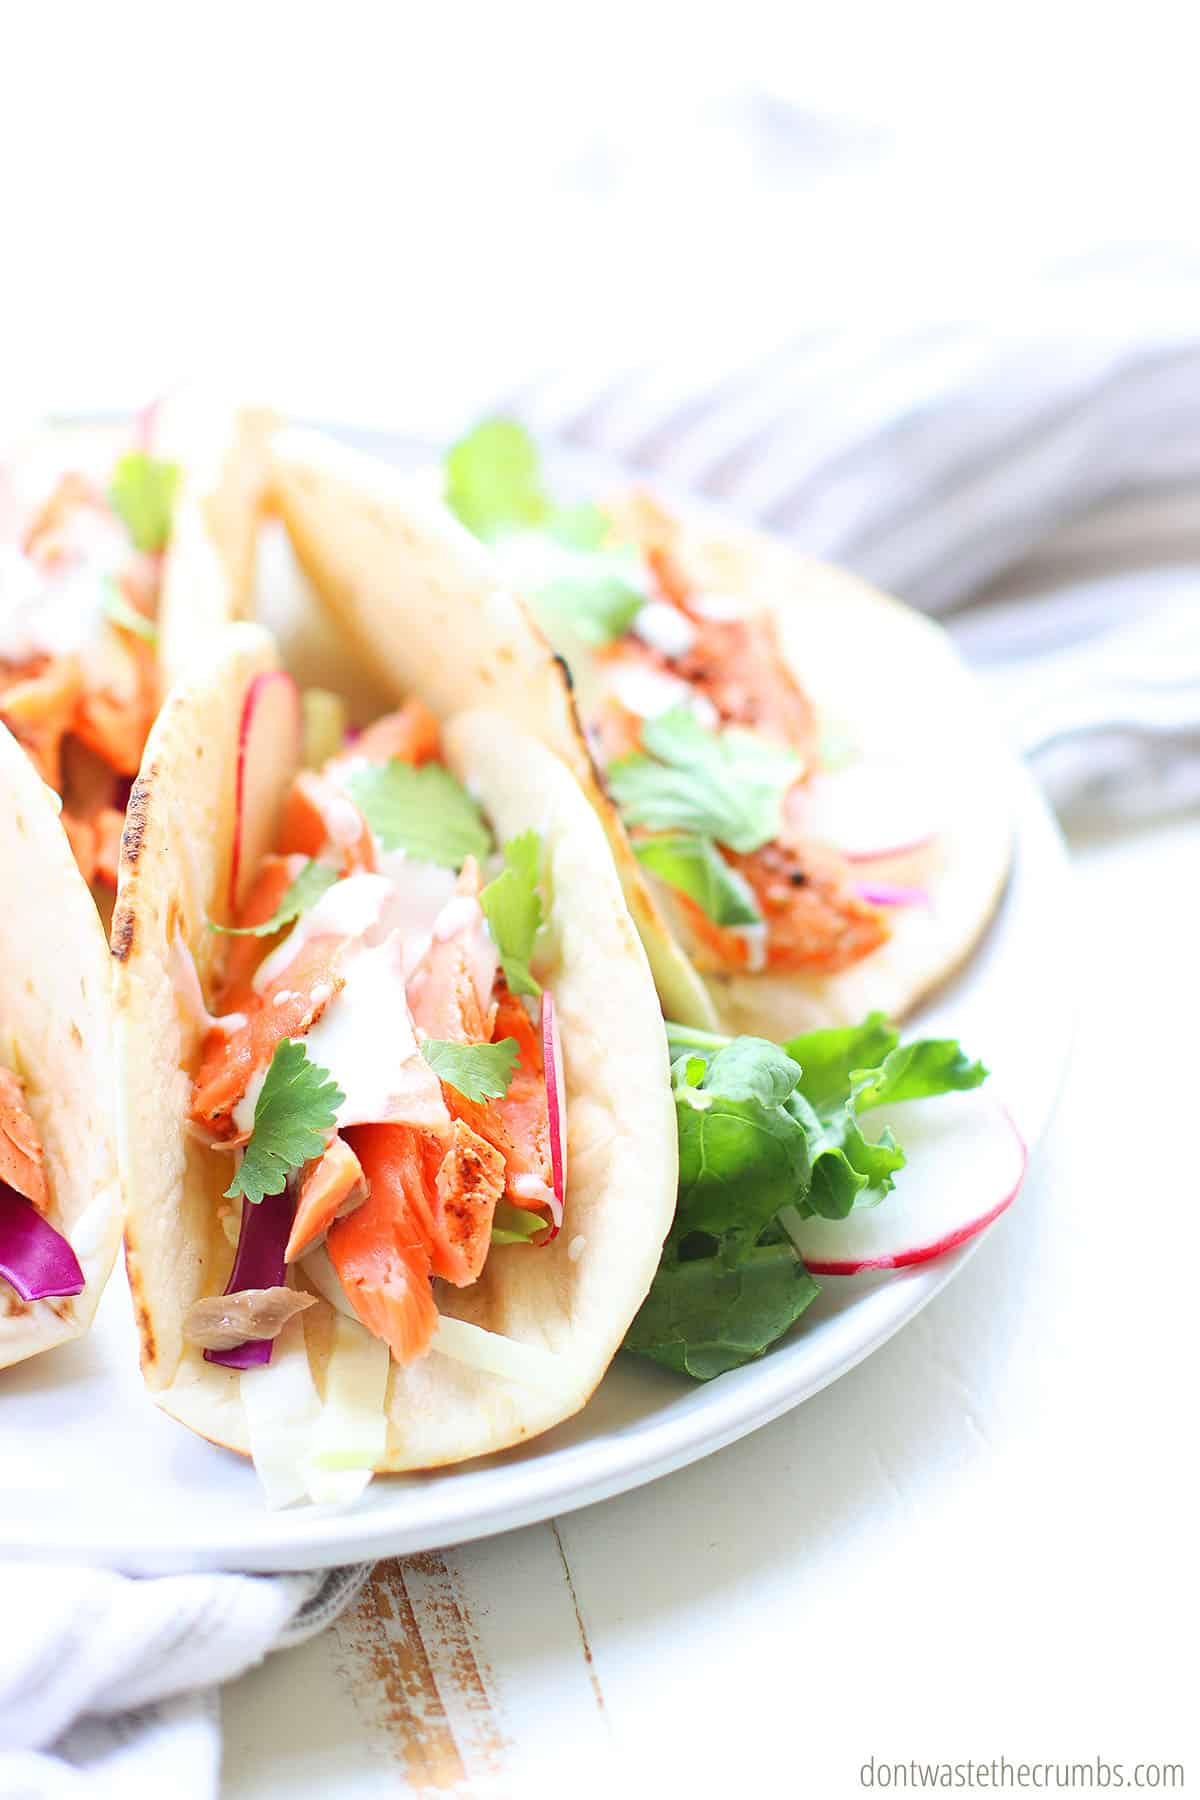 Spicy salmon tacos are on a white plate.